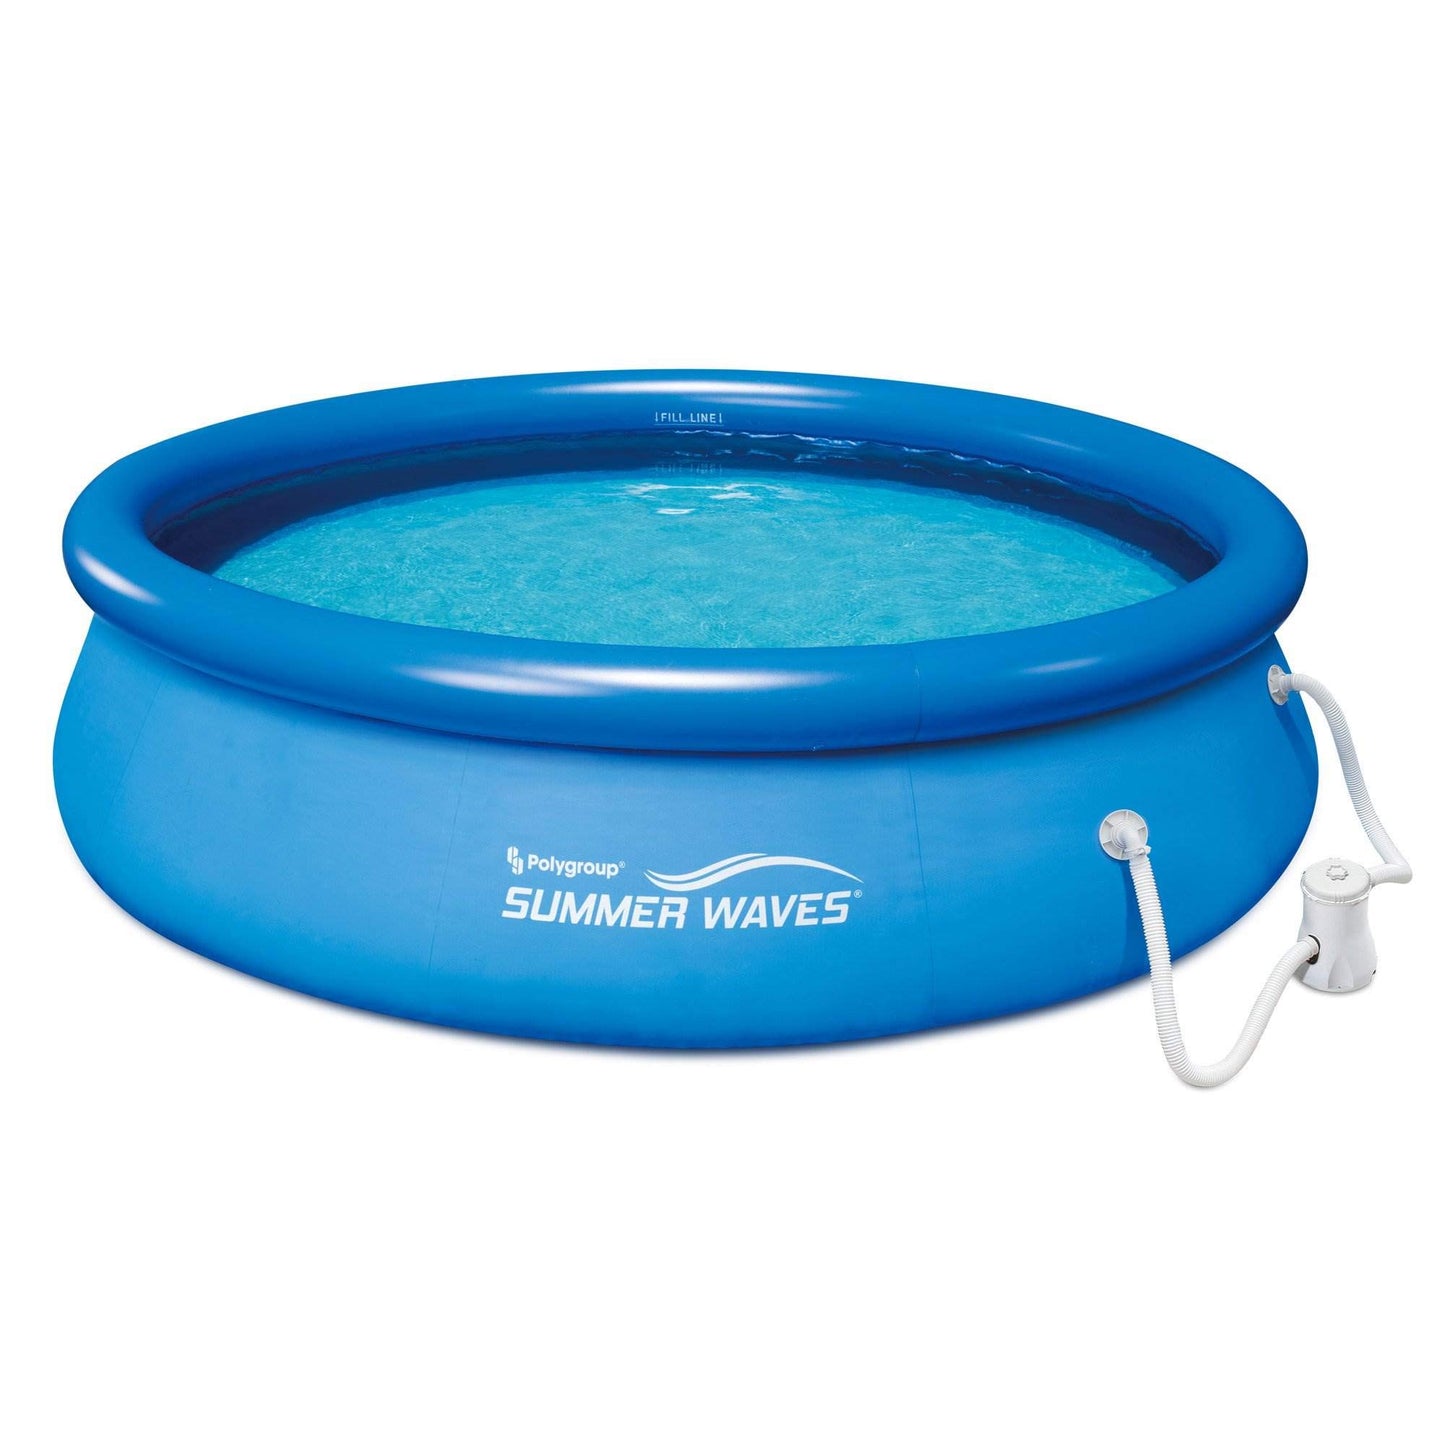 Summer Waves Quick Set Inflatable Pool with Filter Pump, 10' x 30"